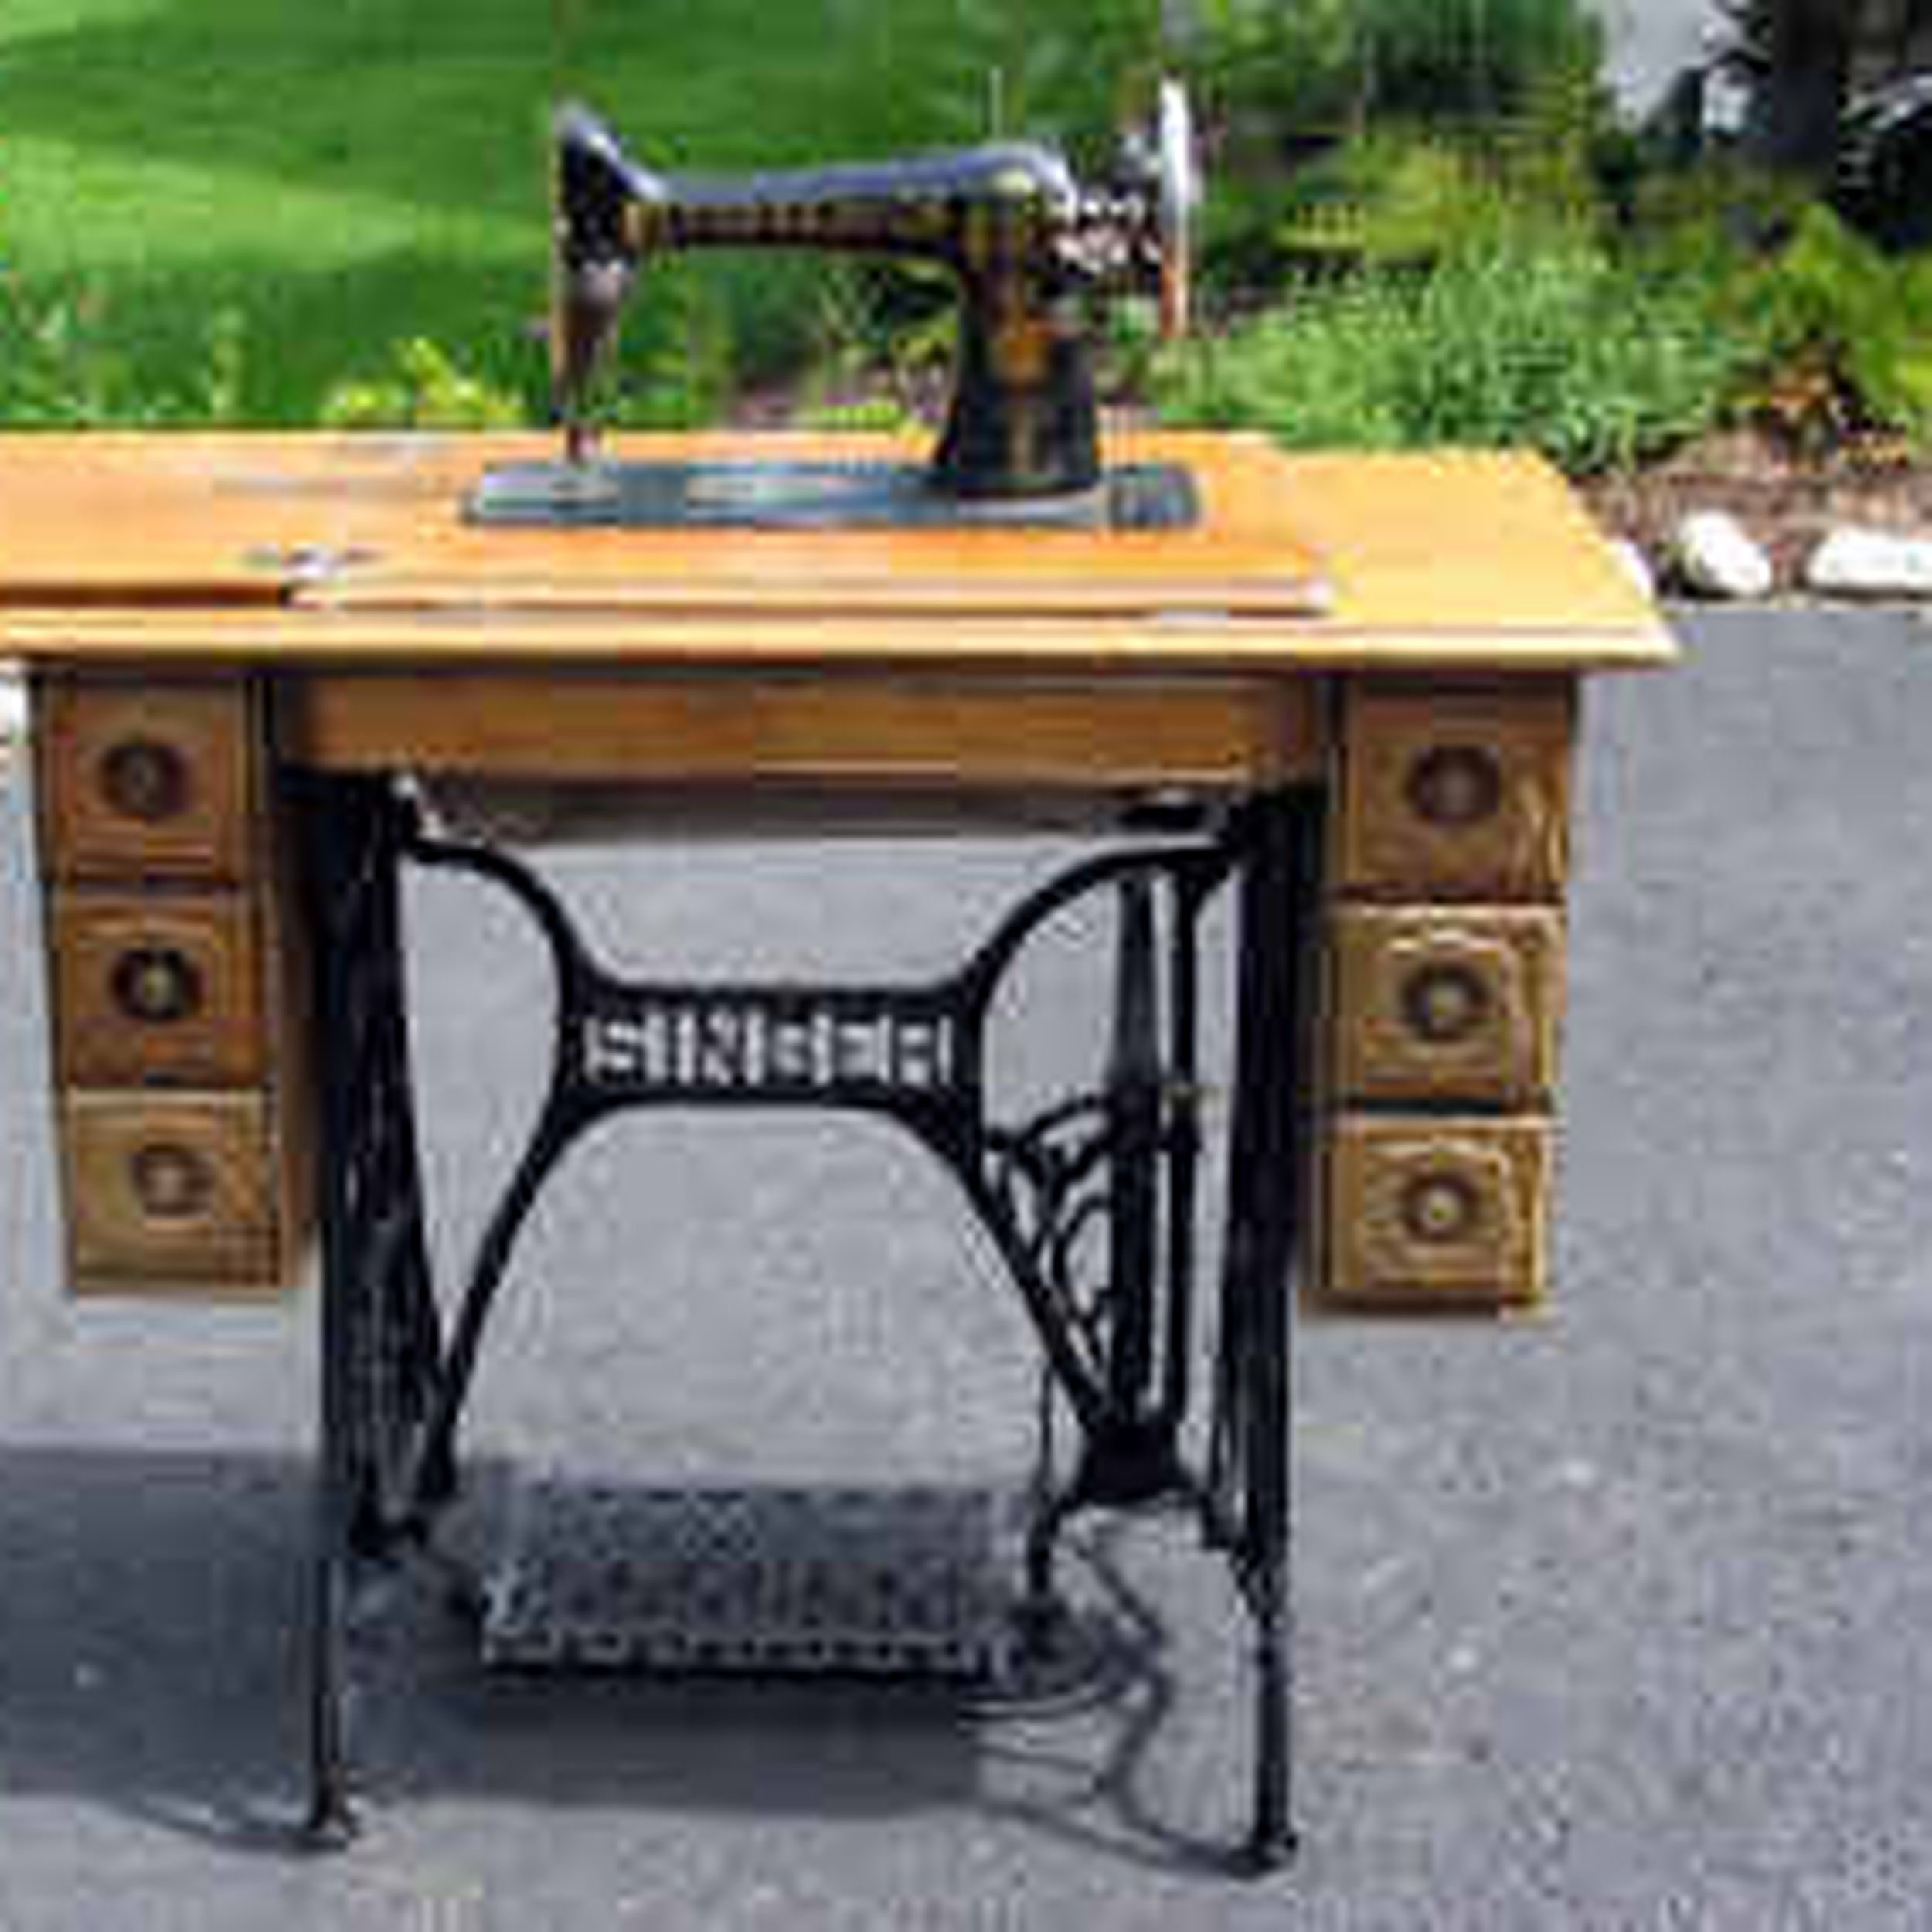 Antique Sewing Machine, Furniture Value Of Old Singer Sewing Machine In Wood Cabinet